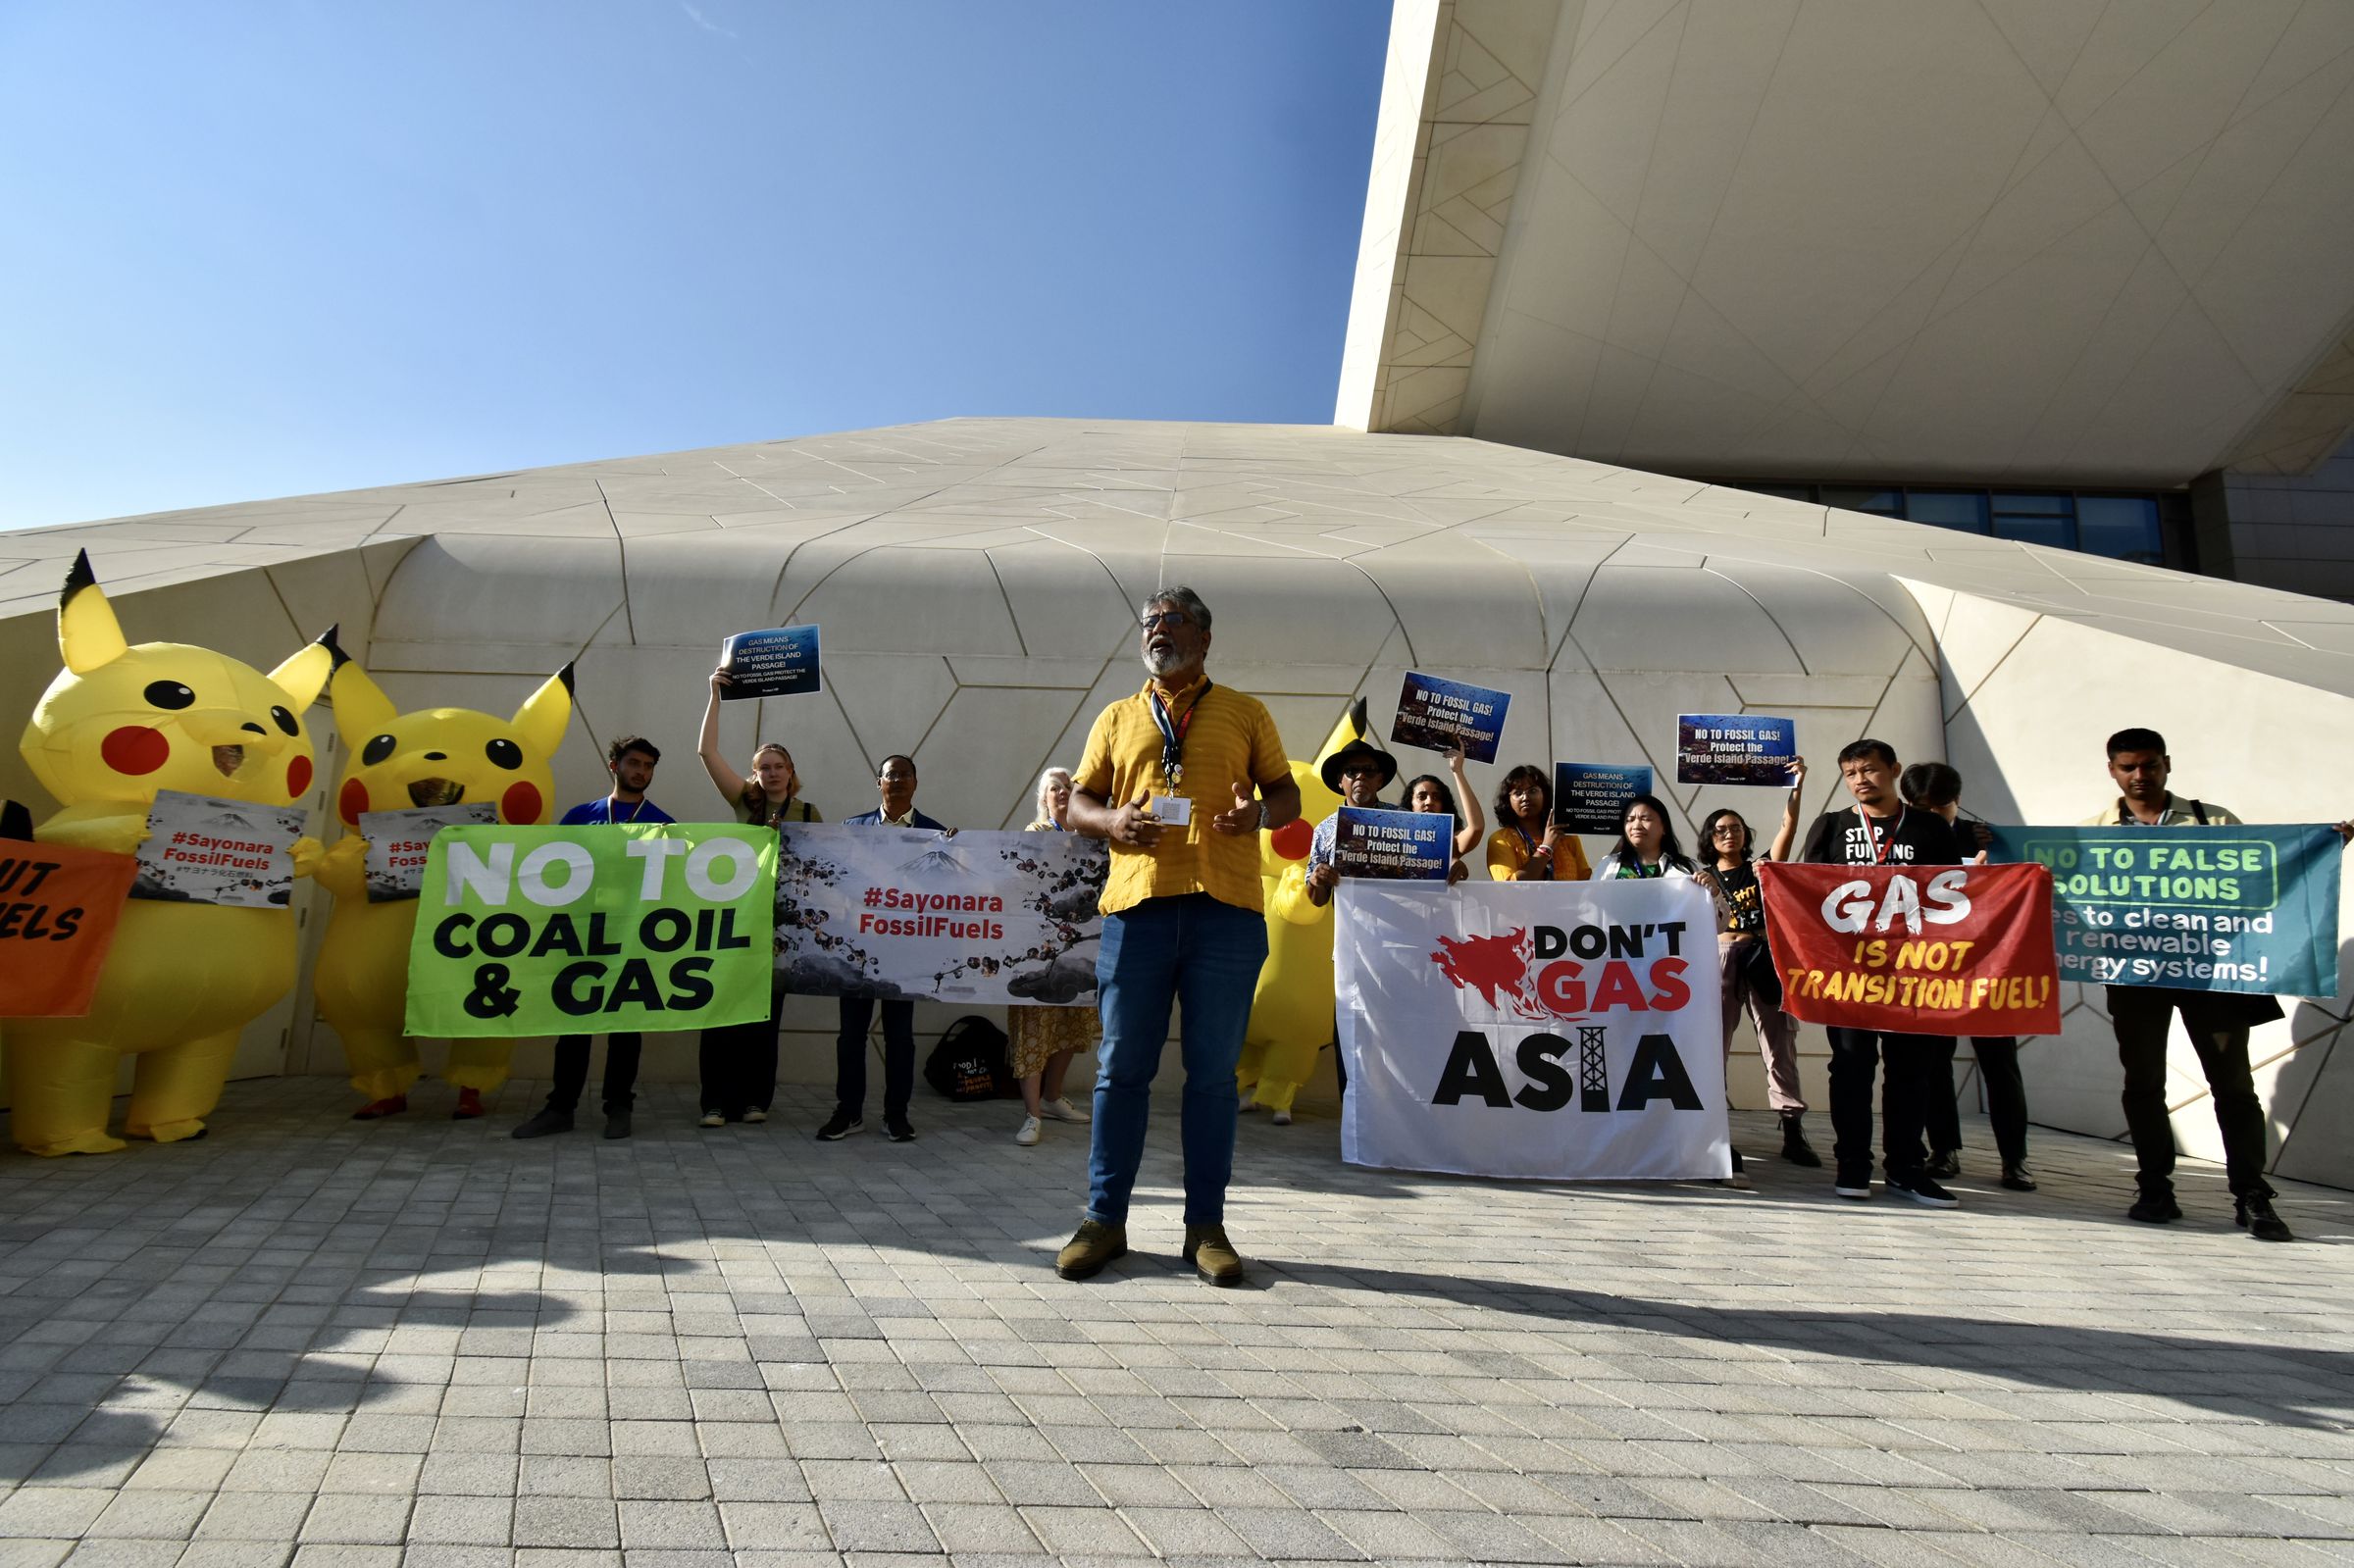 Three people wearing inflatable Pikachu stand among a crowd protesting fossil fuels. One person in a costume holds a sign that says “#Sayonara FossilFuels”. Other demonstrators hold banners that say “No to coal, oil &amp; gas” and “Don’t Gas Asia”.